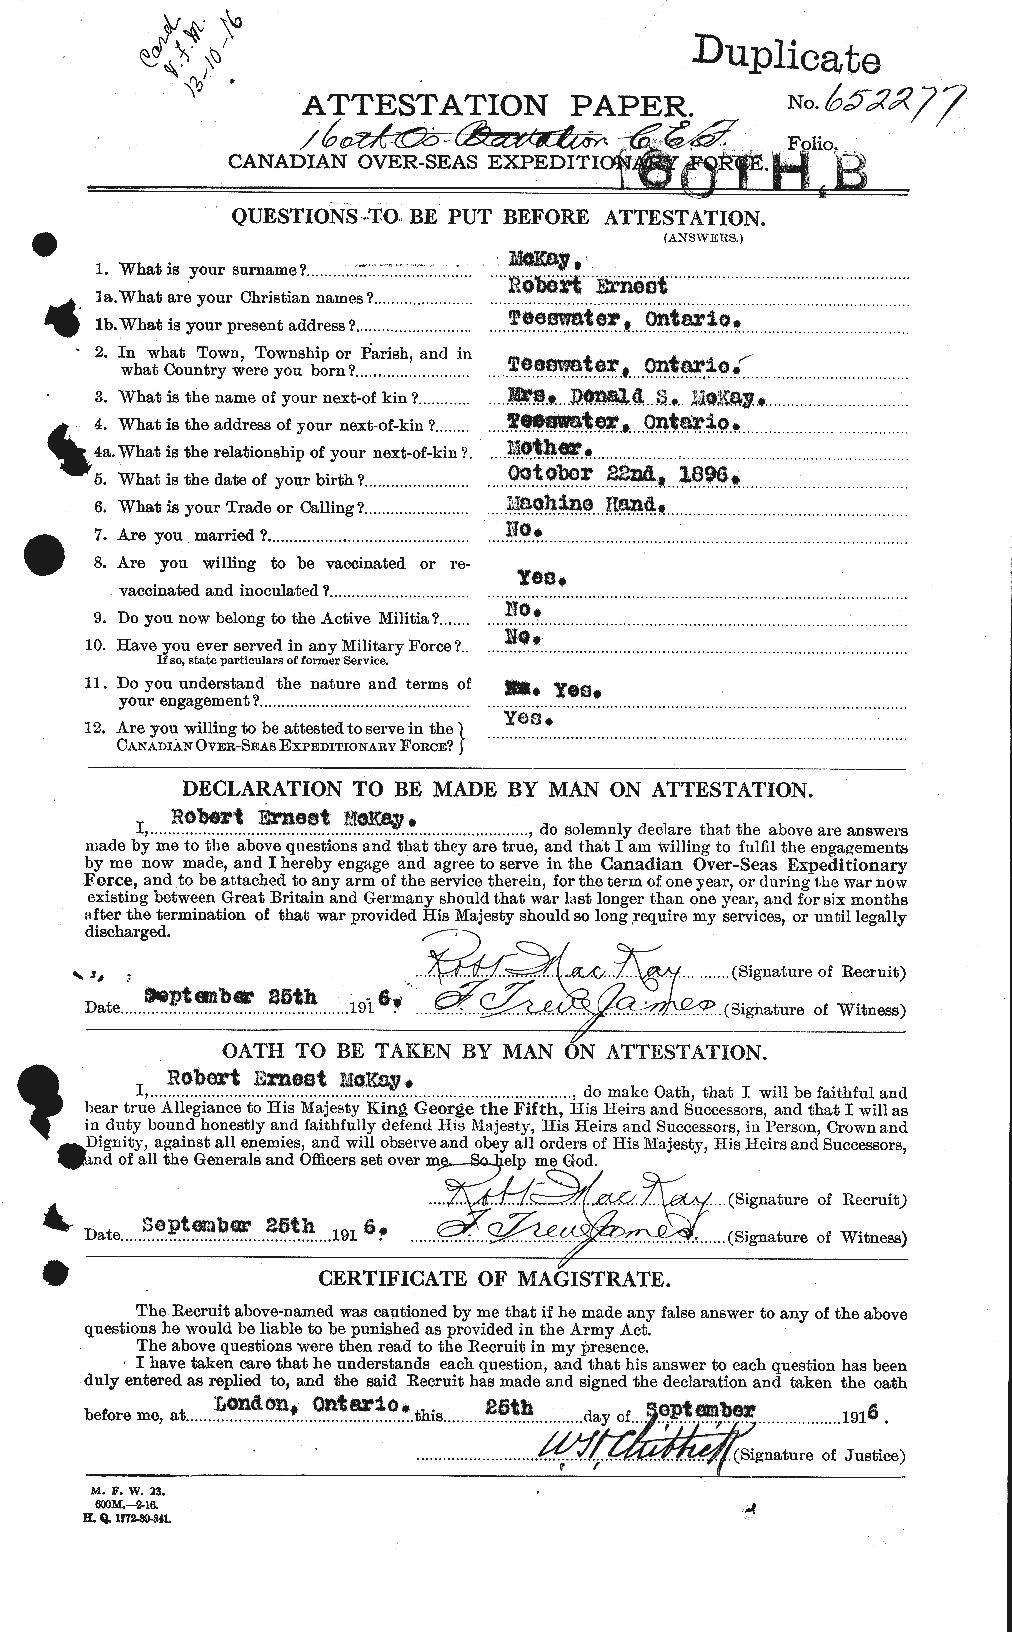 Personnel Records of the First World War - CEF 530094a